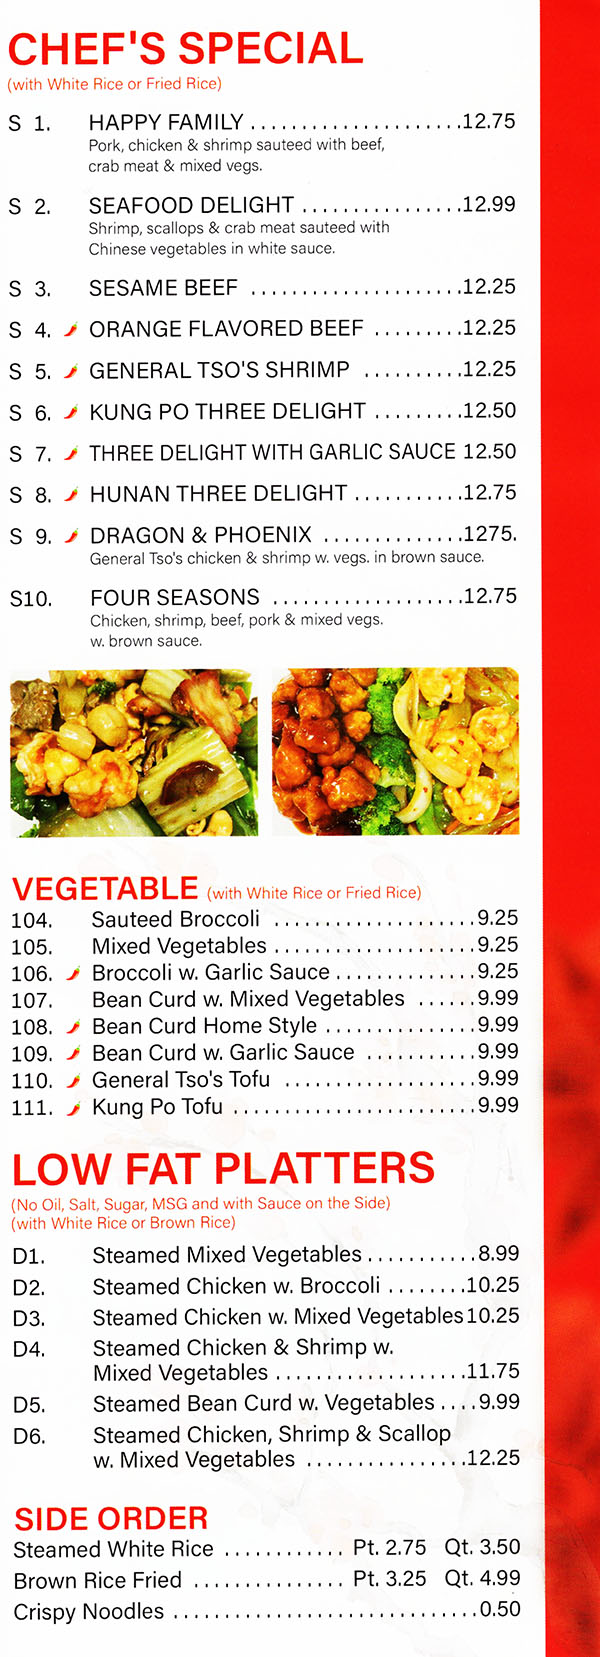 China Garden Chinese Restaurant Menu Page 5
CHEF'S SPECIAL
(with White Rice)
S 1. HAPPY FAMILY $10.99
Pork, chicken , scallop & shrimp sauteed, with broccoli, carrot, mushrooms in brown sauce
S 2. SEAFOOD DELIGHT $11.99
Shrimp, scallops, lobster & crab meat sauteed with Chinese vegetables in white sauce.
S 3. SESAME CHICKEN $9.25
S 4. **GENERAL TSO'S CHICKEN $9.25
S 5. SESAME BEEF $10.25
S 6. **ORANGE FLAVORED CHICKEN $9.25
S 7. **ORANGE FLAVORED BEEF $10.25
S 8. **GENERAL TSO'S SHRIMP $10.25
S 9. SHRIMP CHOW MEIN FUN	$9.75
S 9a. CHICKEN CHOW MEIN FUN $9.25
Chicken & shrimp combination w. rice noodle
S10. **KUNG PO THREE DELIGHTS $10.25
S11. **THREE DELIGHT WITH GARLIC SAUCE $10.25
S12. **HUNAN THREE DELIGHT $10.25
S13. BLACK PEPPER CHICKEN $8.50
S14. PEANUT BUTTER CHICKEN $8.50
S15. **DRAGON & PHOENIX $10.50
General Tso' s chicken & shrimp w. vegetable in white sauce.
S16. FOUR SEASONS $9.50
Chicken, shrimp, beef, pork & mixed vegetable w. brown sauce.
s18. HOT SPICY BEEF	  $9.50
s19 HOT SPICY CHICKEN	$8.95
LOW FAT PLATTERS
(No Oil. Salt, Sugar. MSG and with Sauce on the Side)
(with White Rice or Brown Rice)
D1. Steamed Mixed Vegetable $7.75
D2. Steamed Chicken w. Broccoli $8.50
D2a. Steamed Chicken & Shrimp e. Mixed Vegetable  $8.50
D3. Steamed Chicken & Shrimp w. Mixed Vegetable $9.75
D4. Steamed Bean Curd w. Vegetable $7.99
D5. Steamed Chicken, Shrimp & Scallop w. Mixed Vegetable $10.99
SIDE ORDER
Steamed White Rice Pt. $1.50 / Qt. $2.75
Brown Rice Pt. $1.99 / Qt. $3.50
Fried Crispy Noodles $0.50
Menu Provided By: Metro Dining Delivery www.MetroDiningDelivery.com 402-474-7335